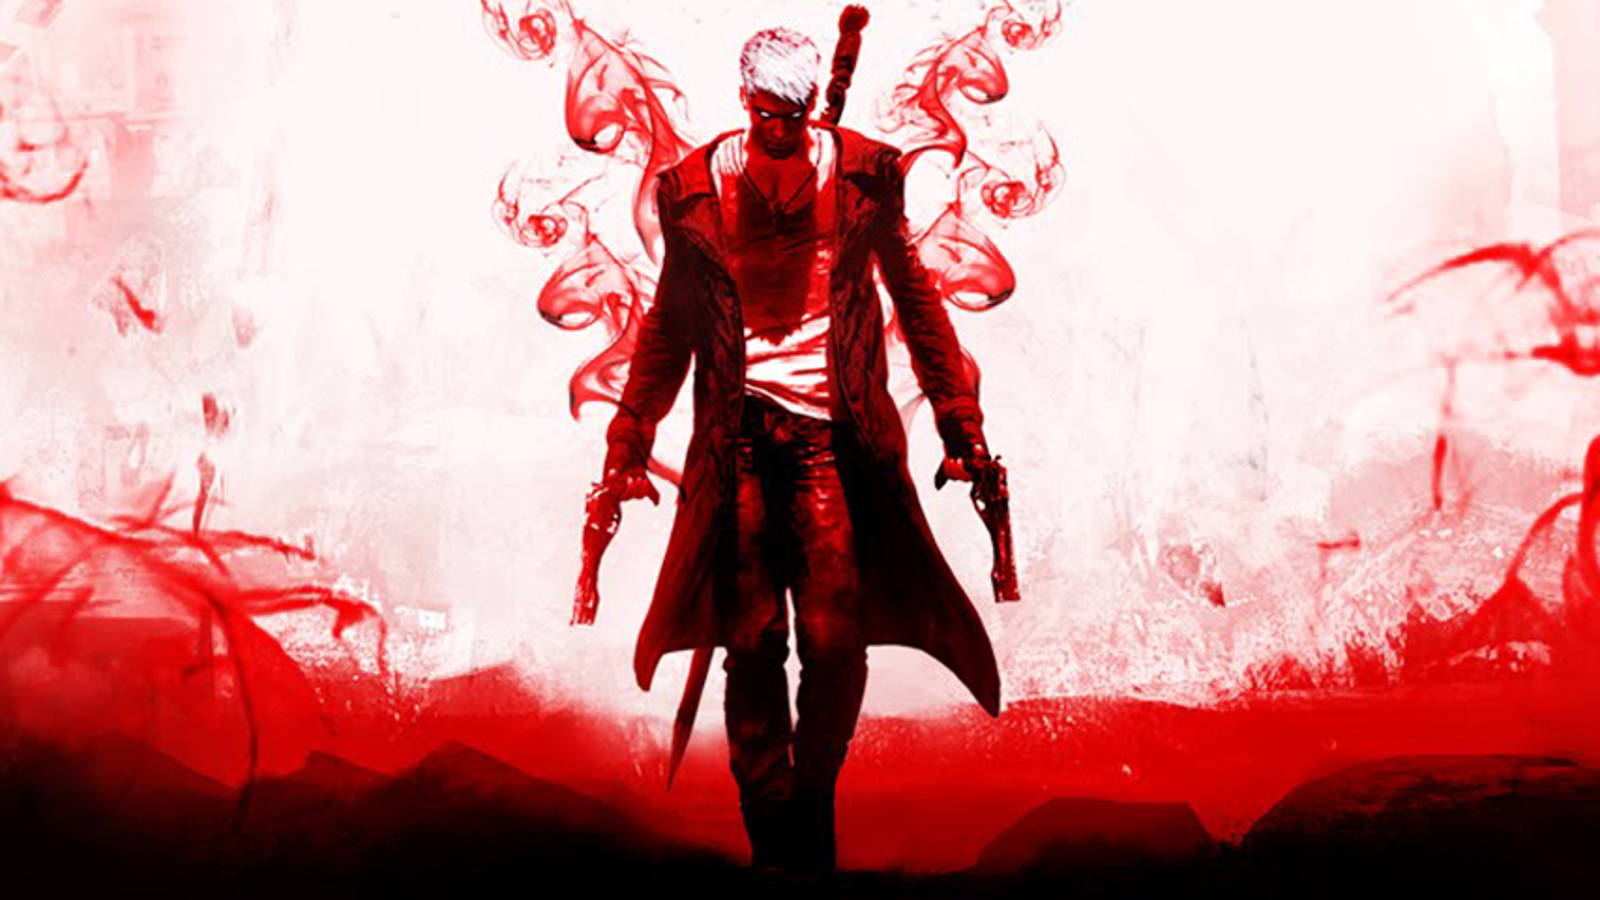 DmC: Devil May Cry Definitive Edition review: new modes, less